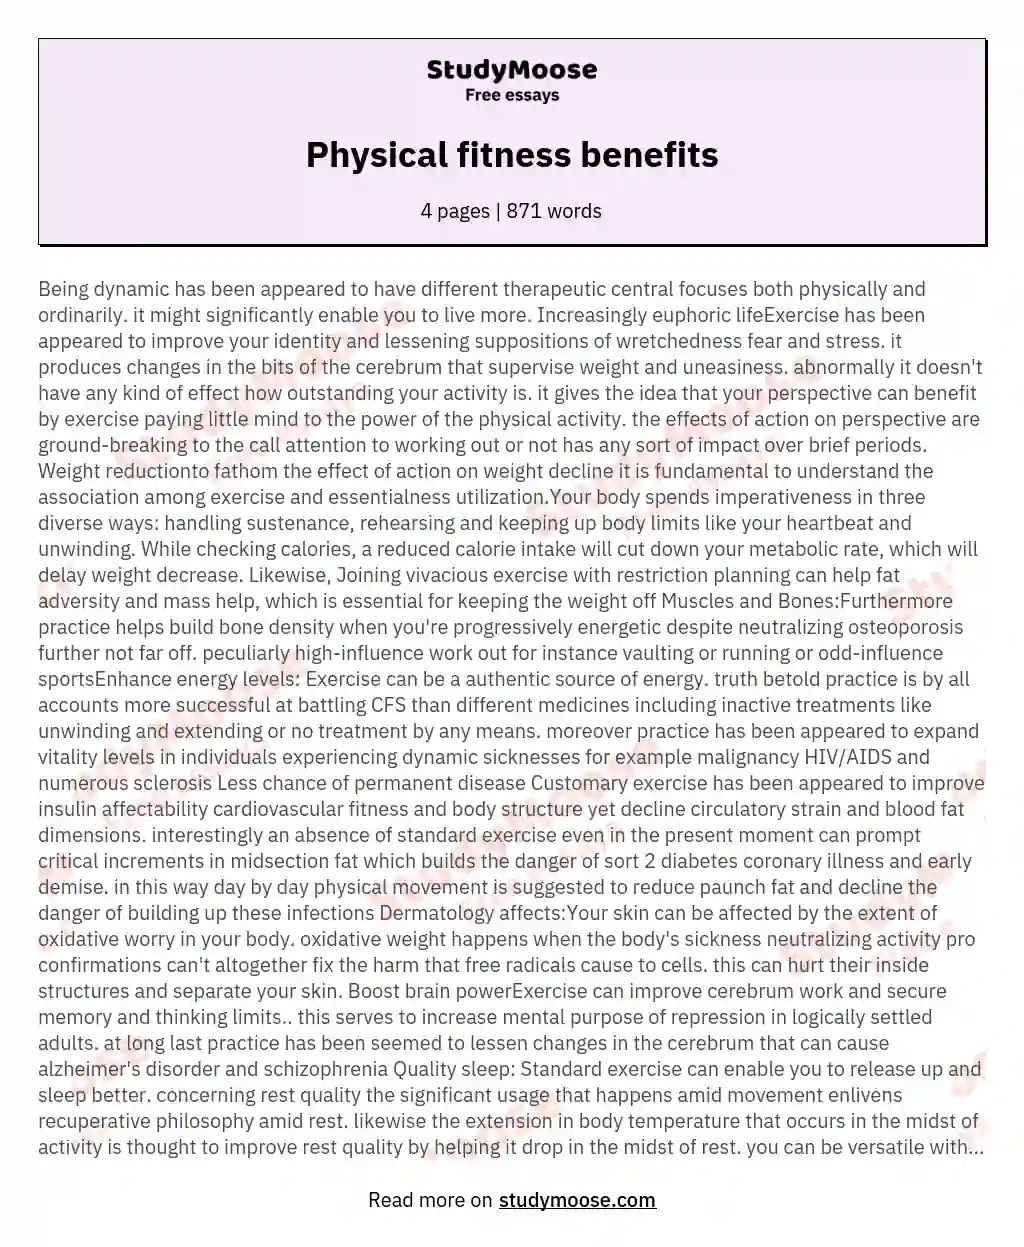 what is the fitness essay